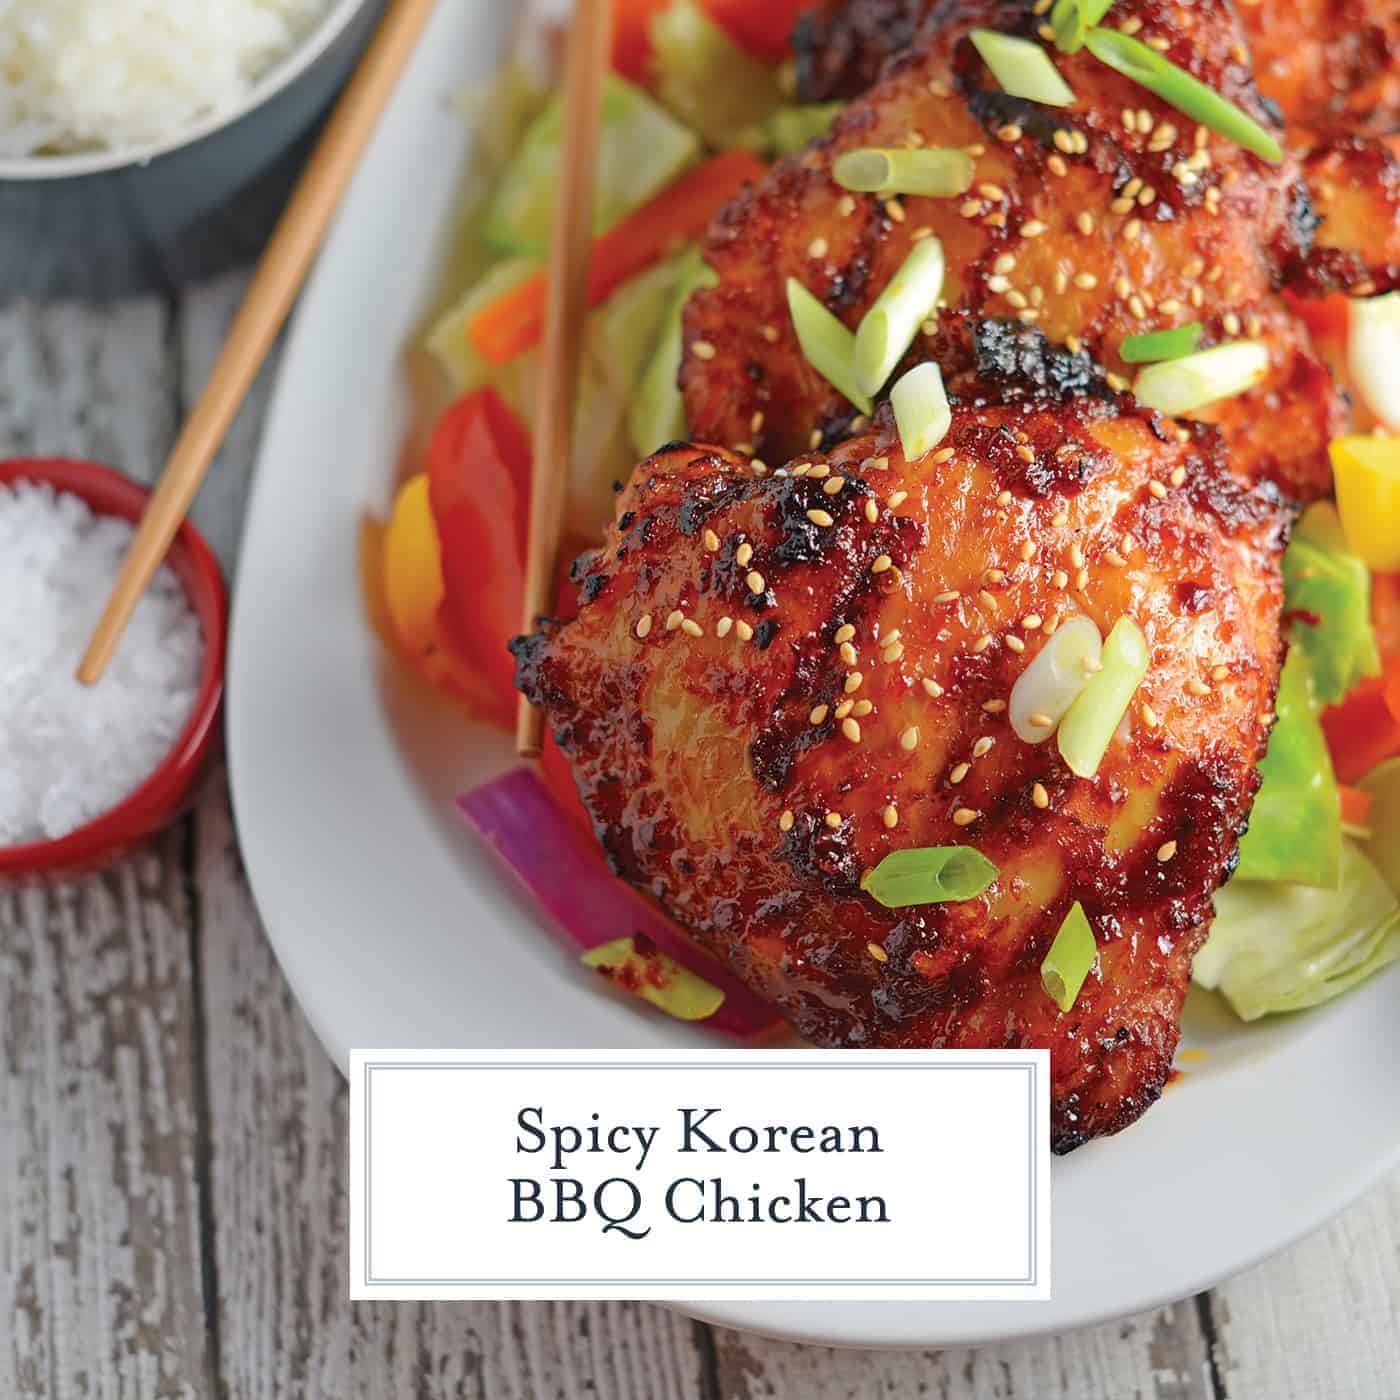 Spicy Korean BBQ Chicken is a spicy chicken marinade using chile garlic sauce, dark soy sauce and apple to balance the sweet. Use on any type of chicken and grill to perfection. #grilledchicken #koreanchicken #bbqchicken www.savoryexperiments.com